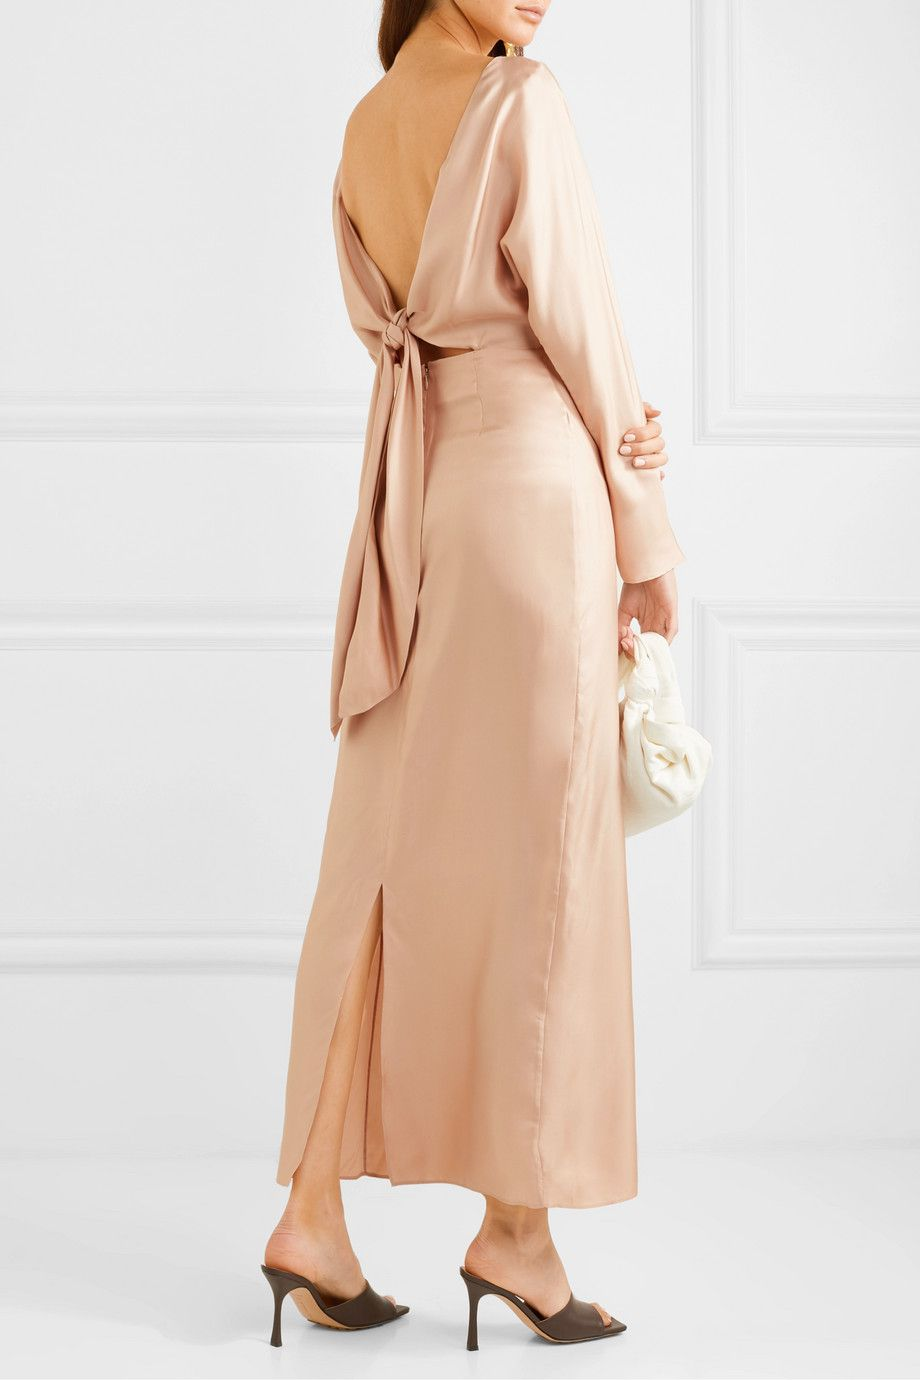 31 Gorgeous Mother of the Bride Dresses for Every Style and Season -   19 dress Silk the bride ideas